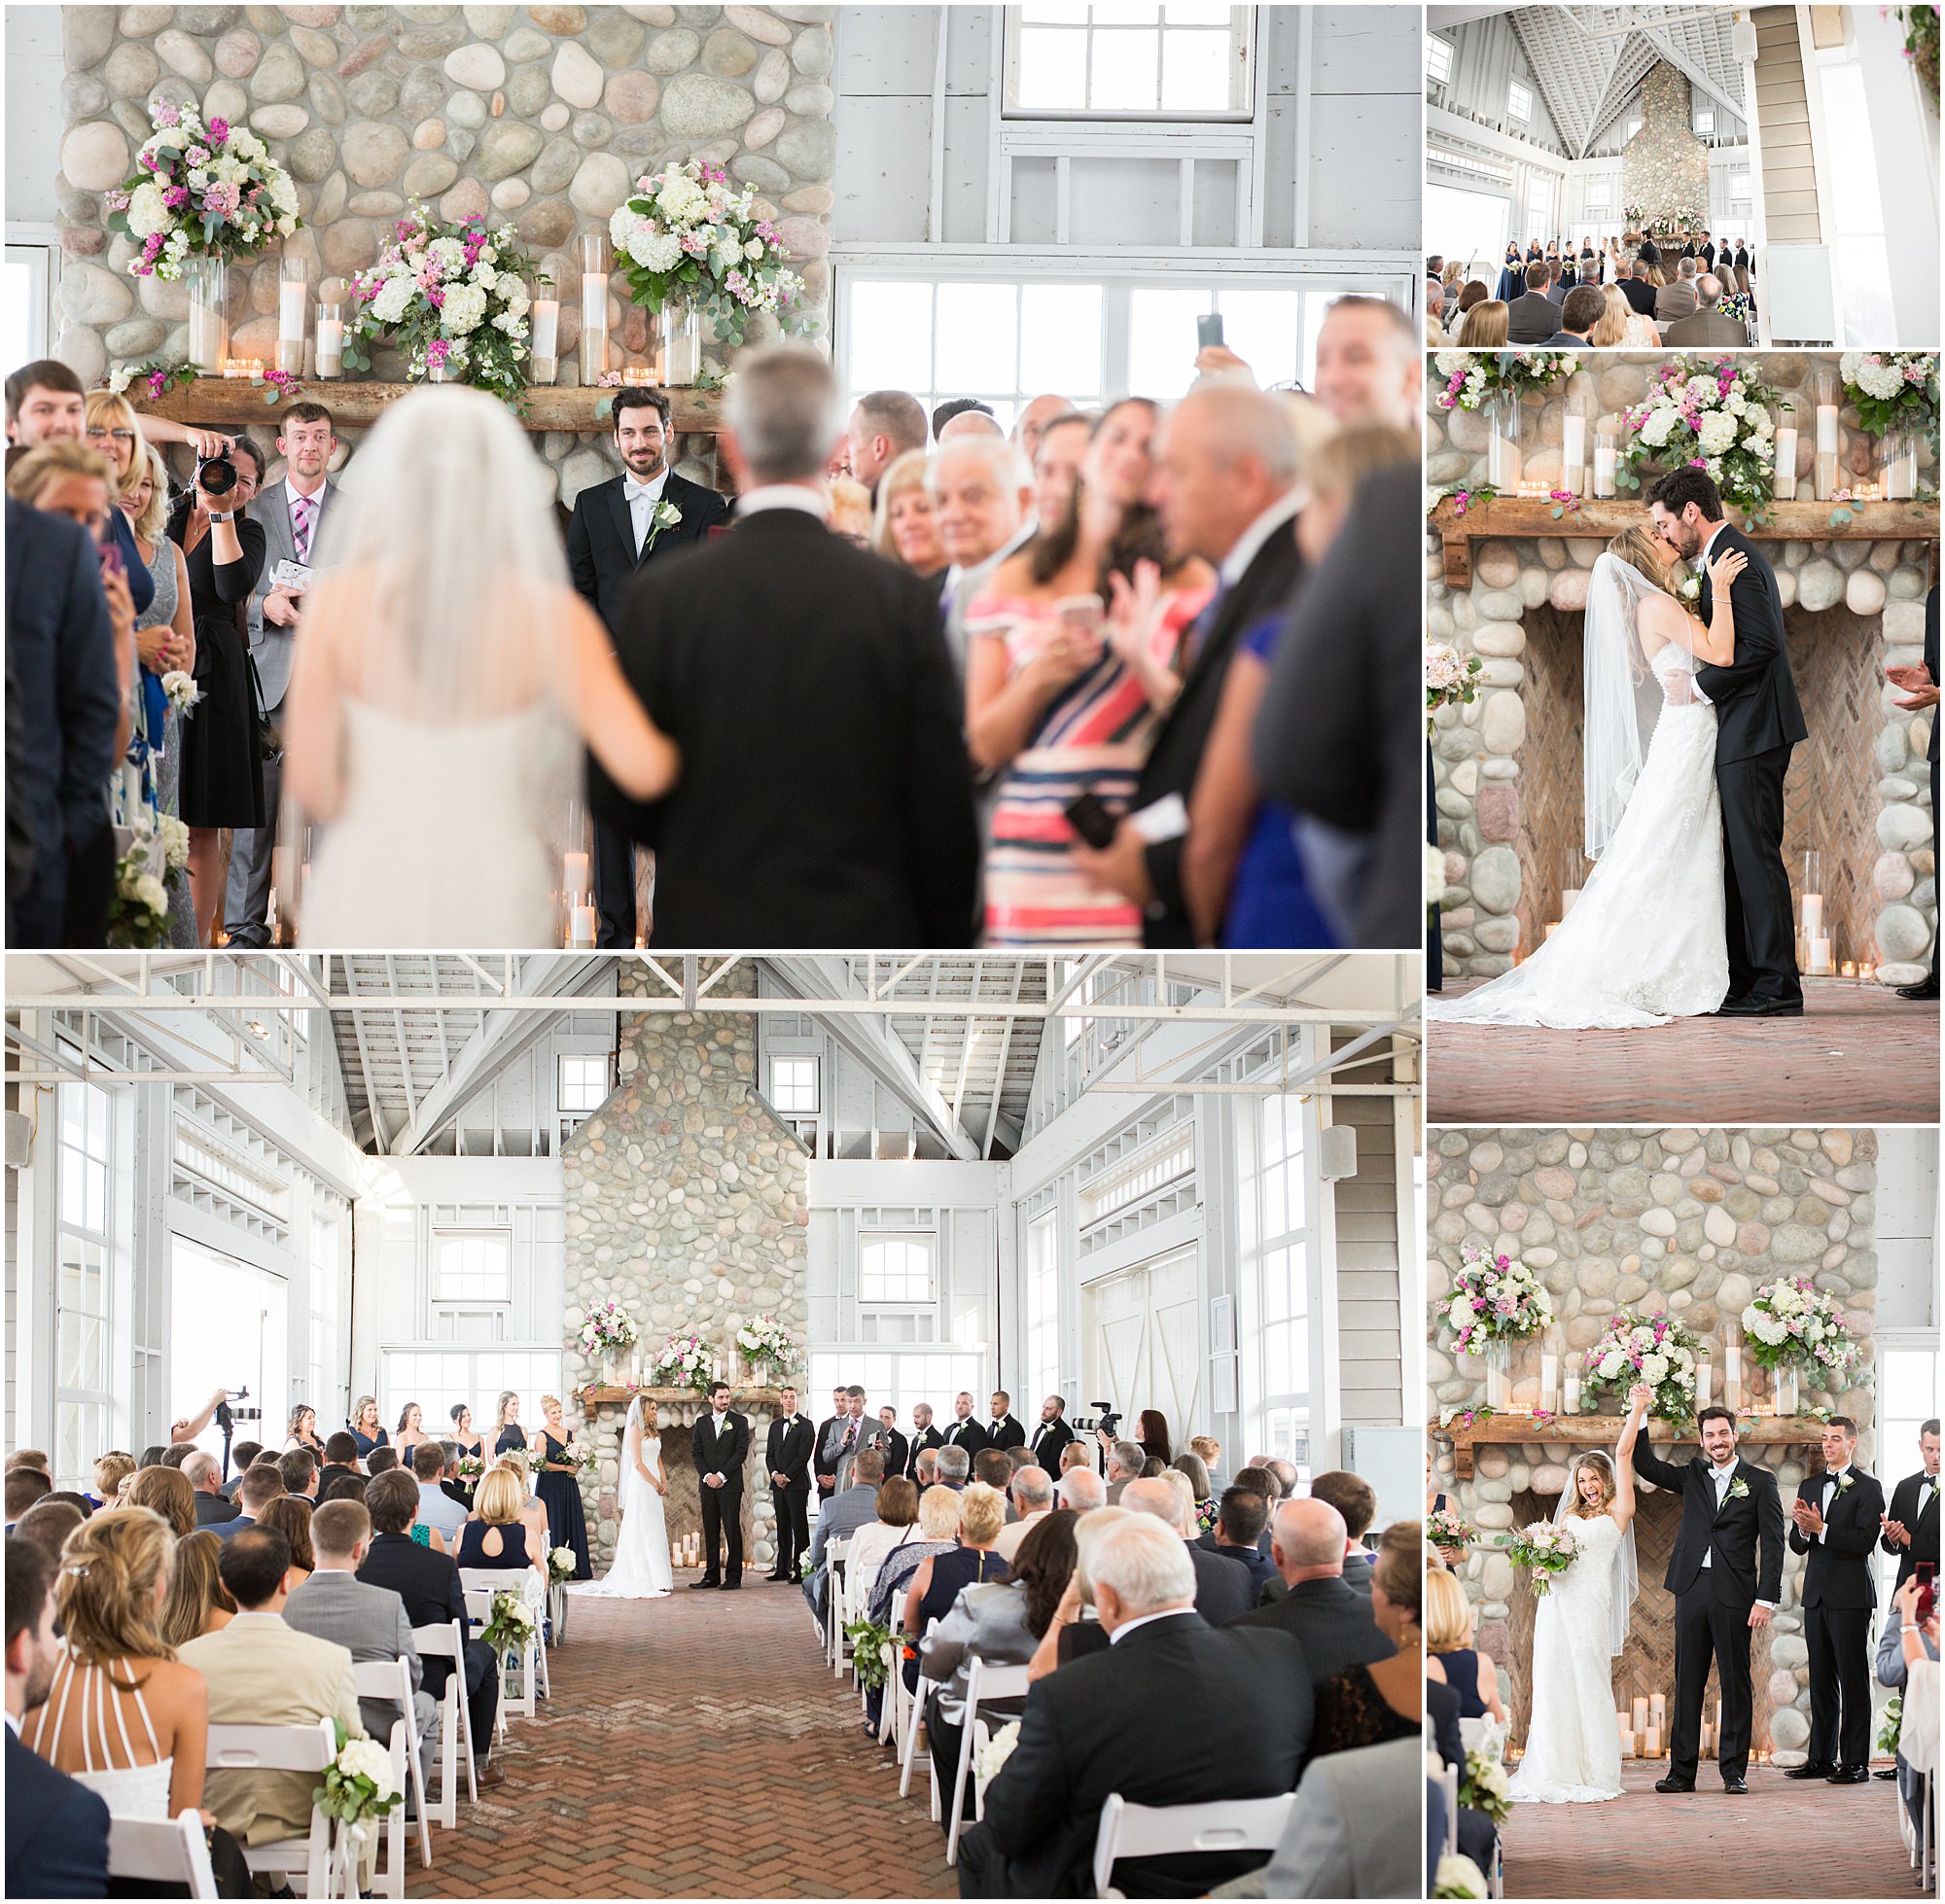 The chapel on the grounds of Mallard Island Yacht Club make it one of the most romantic venues in NJ